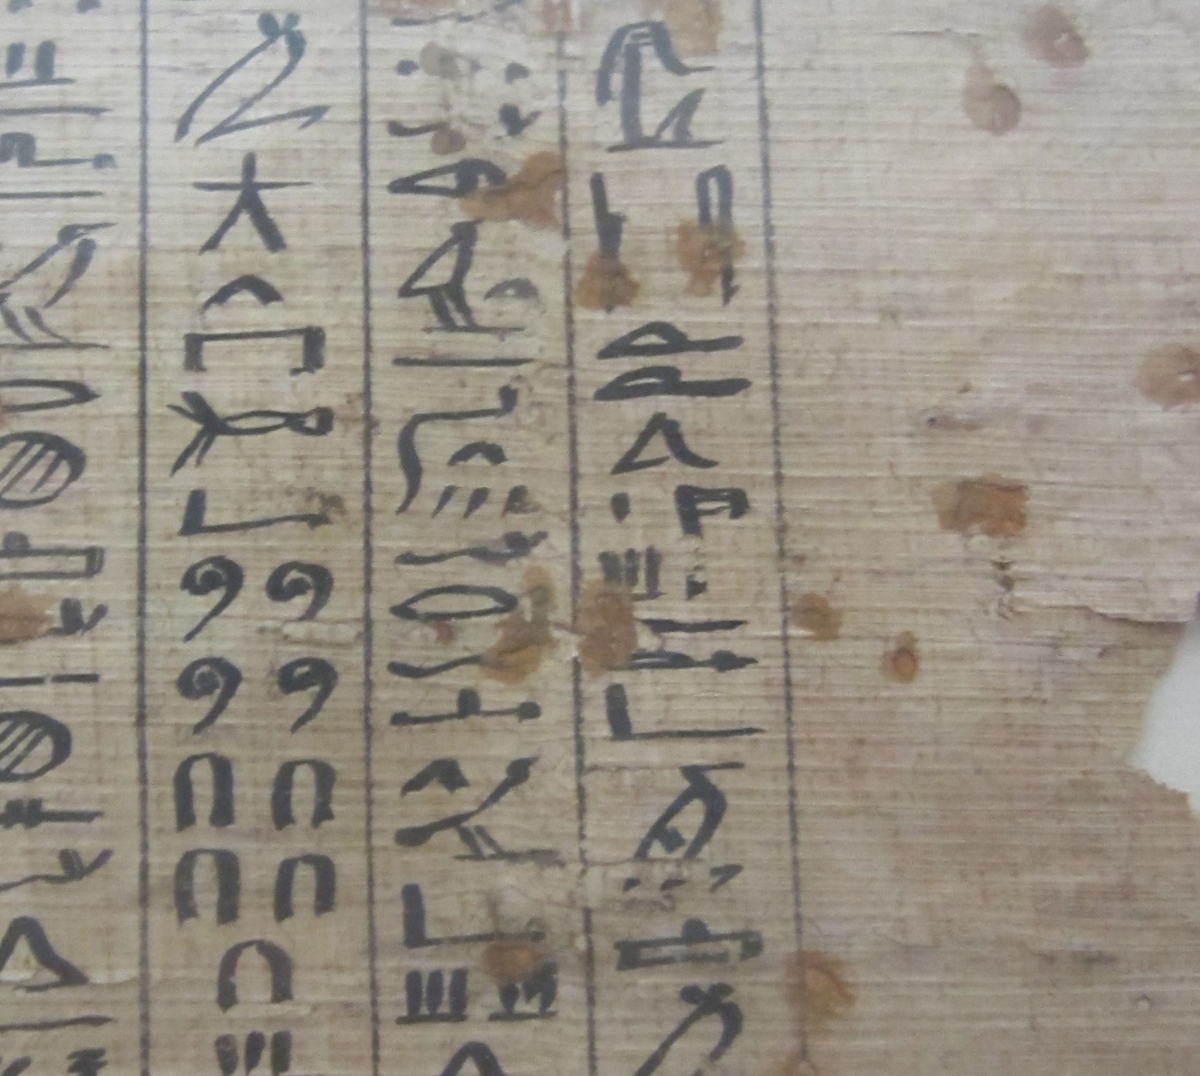 Hieroglyphs on a papyrus from the Museo Egizio.